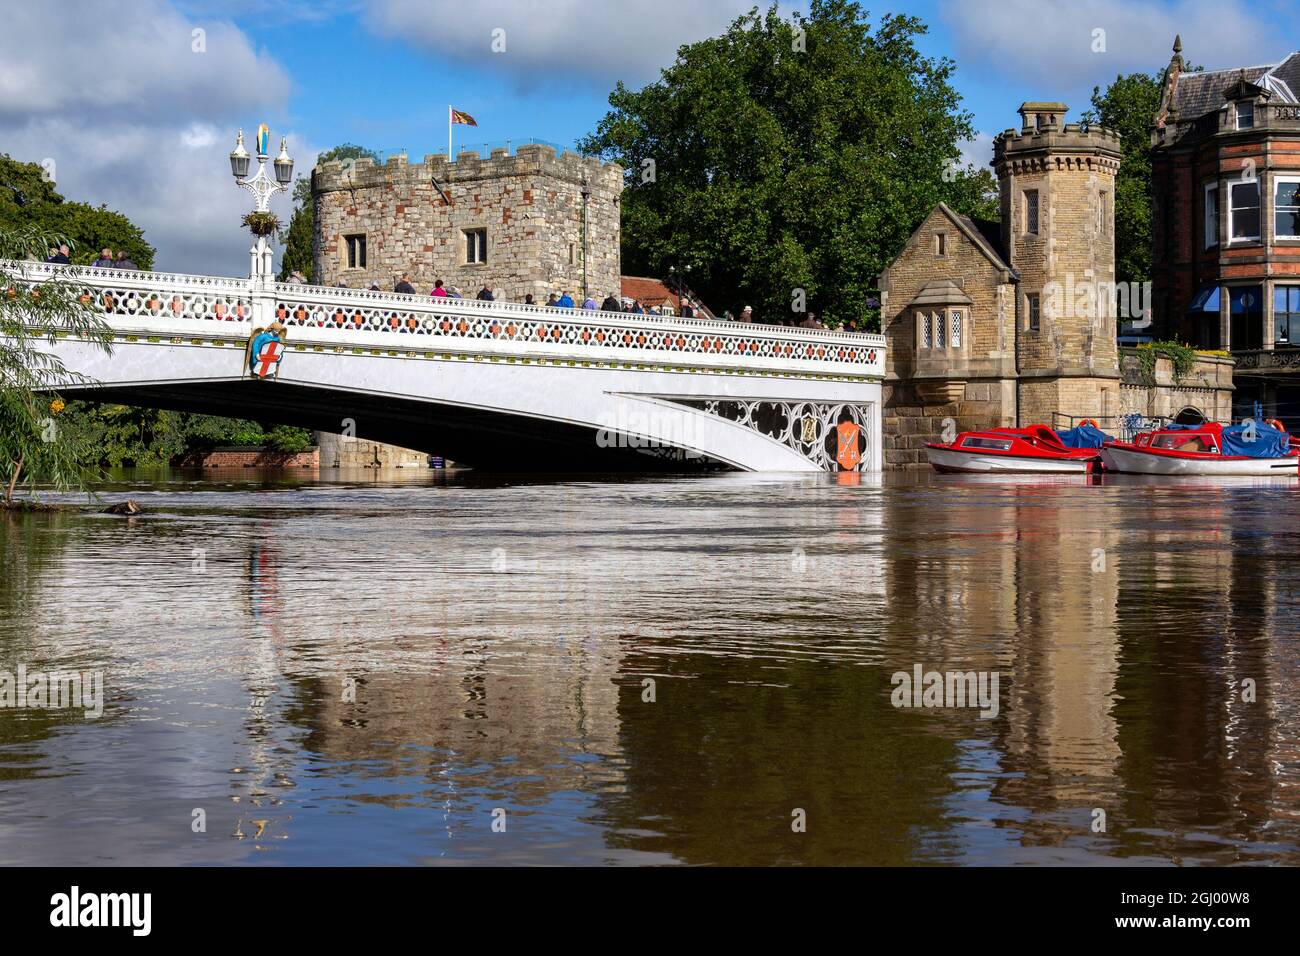 Lendal Bridge with the River Ouse at flood level. It is an iron bridge with details in the Gothic style popular in Victorian England. Stock Photo